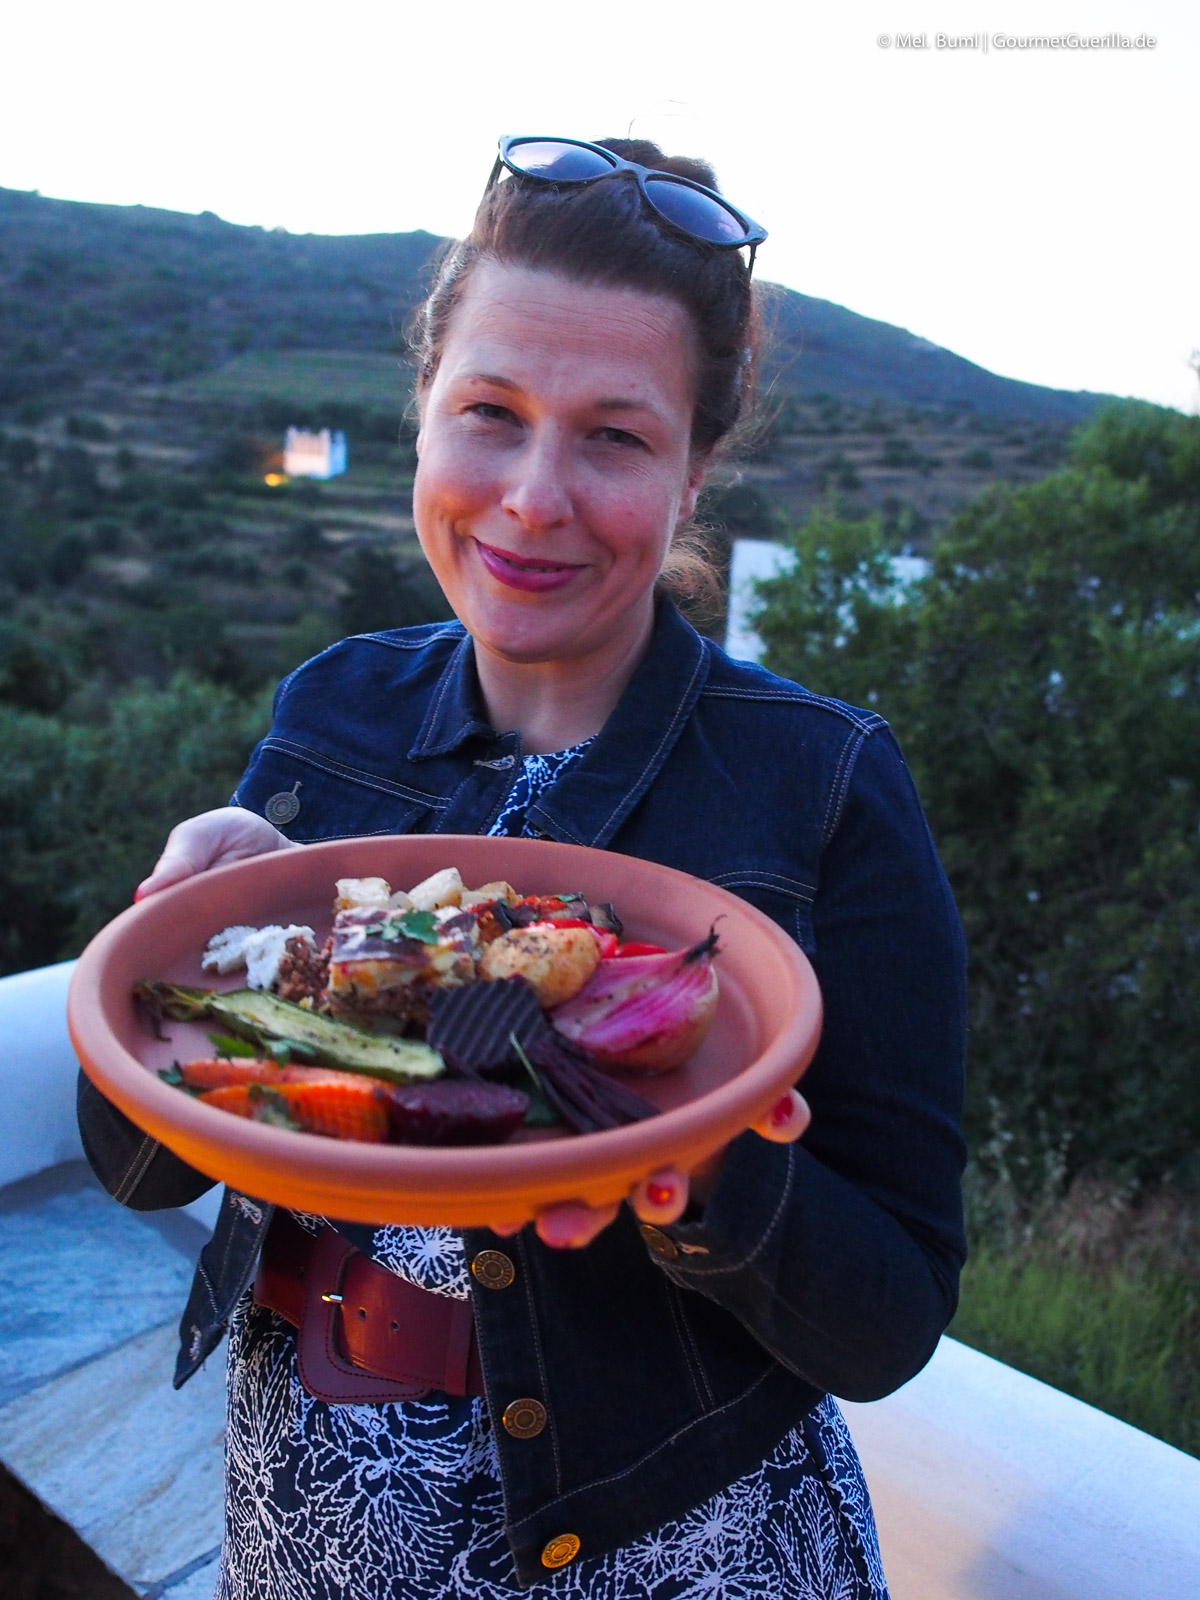  Food from regional products Travel Report Tinos Foodpath gri echische Insel Cyclades Greece | GourmetGuerilla.de 